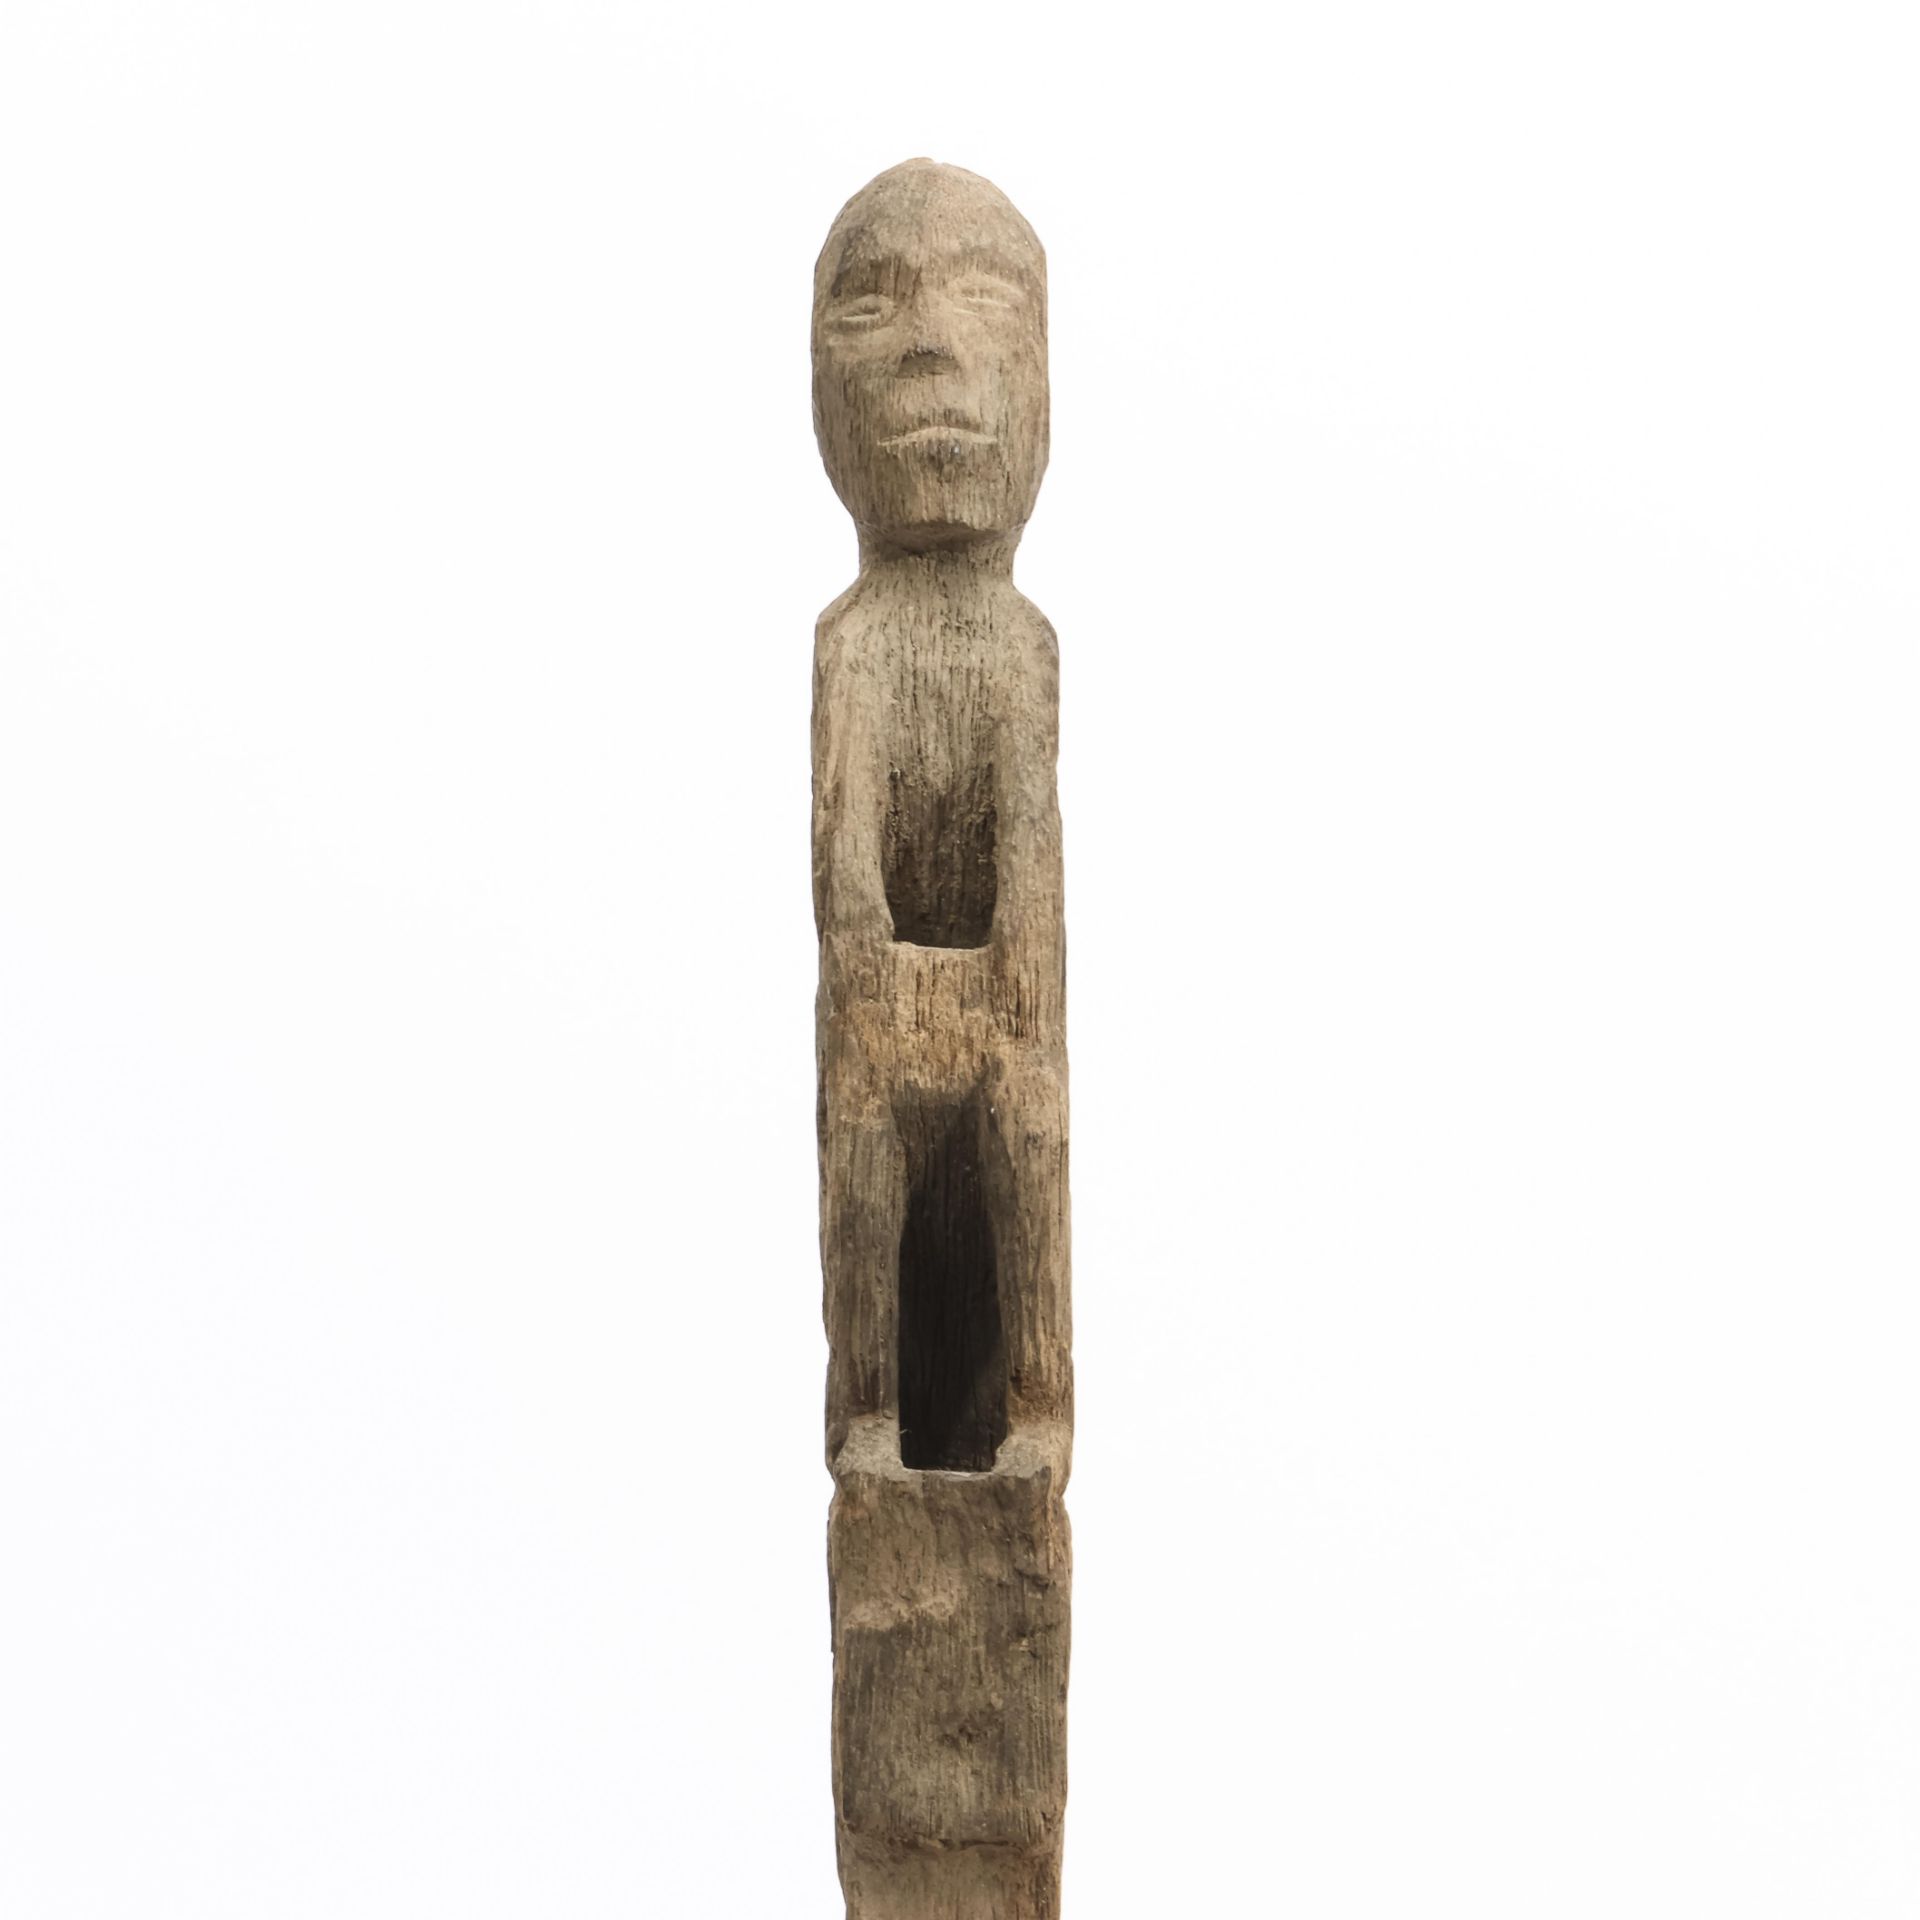 Borneo, Dayak, a wooden rice protector, squatting figure on top of a pole. - Image 3 of 3